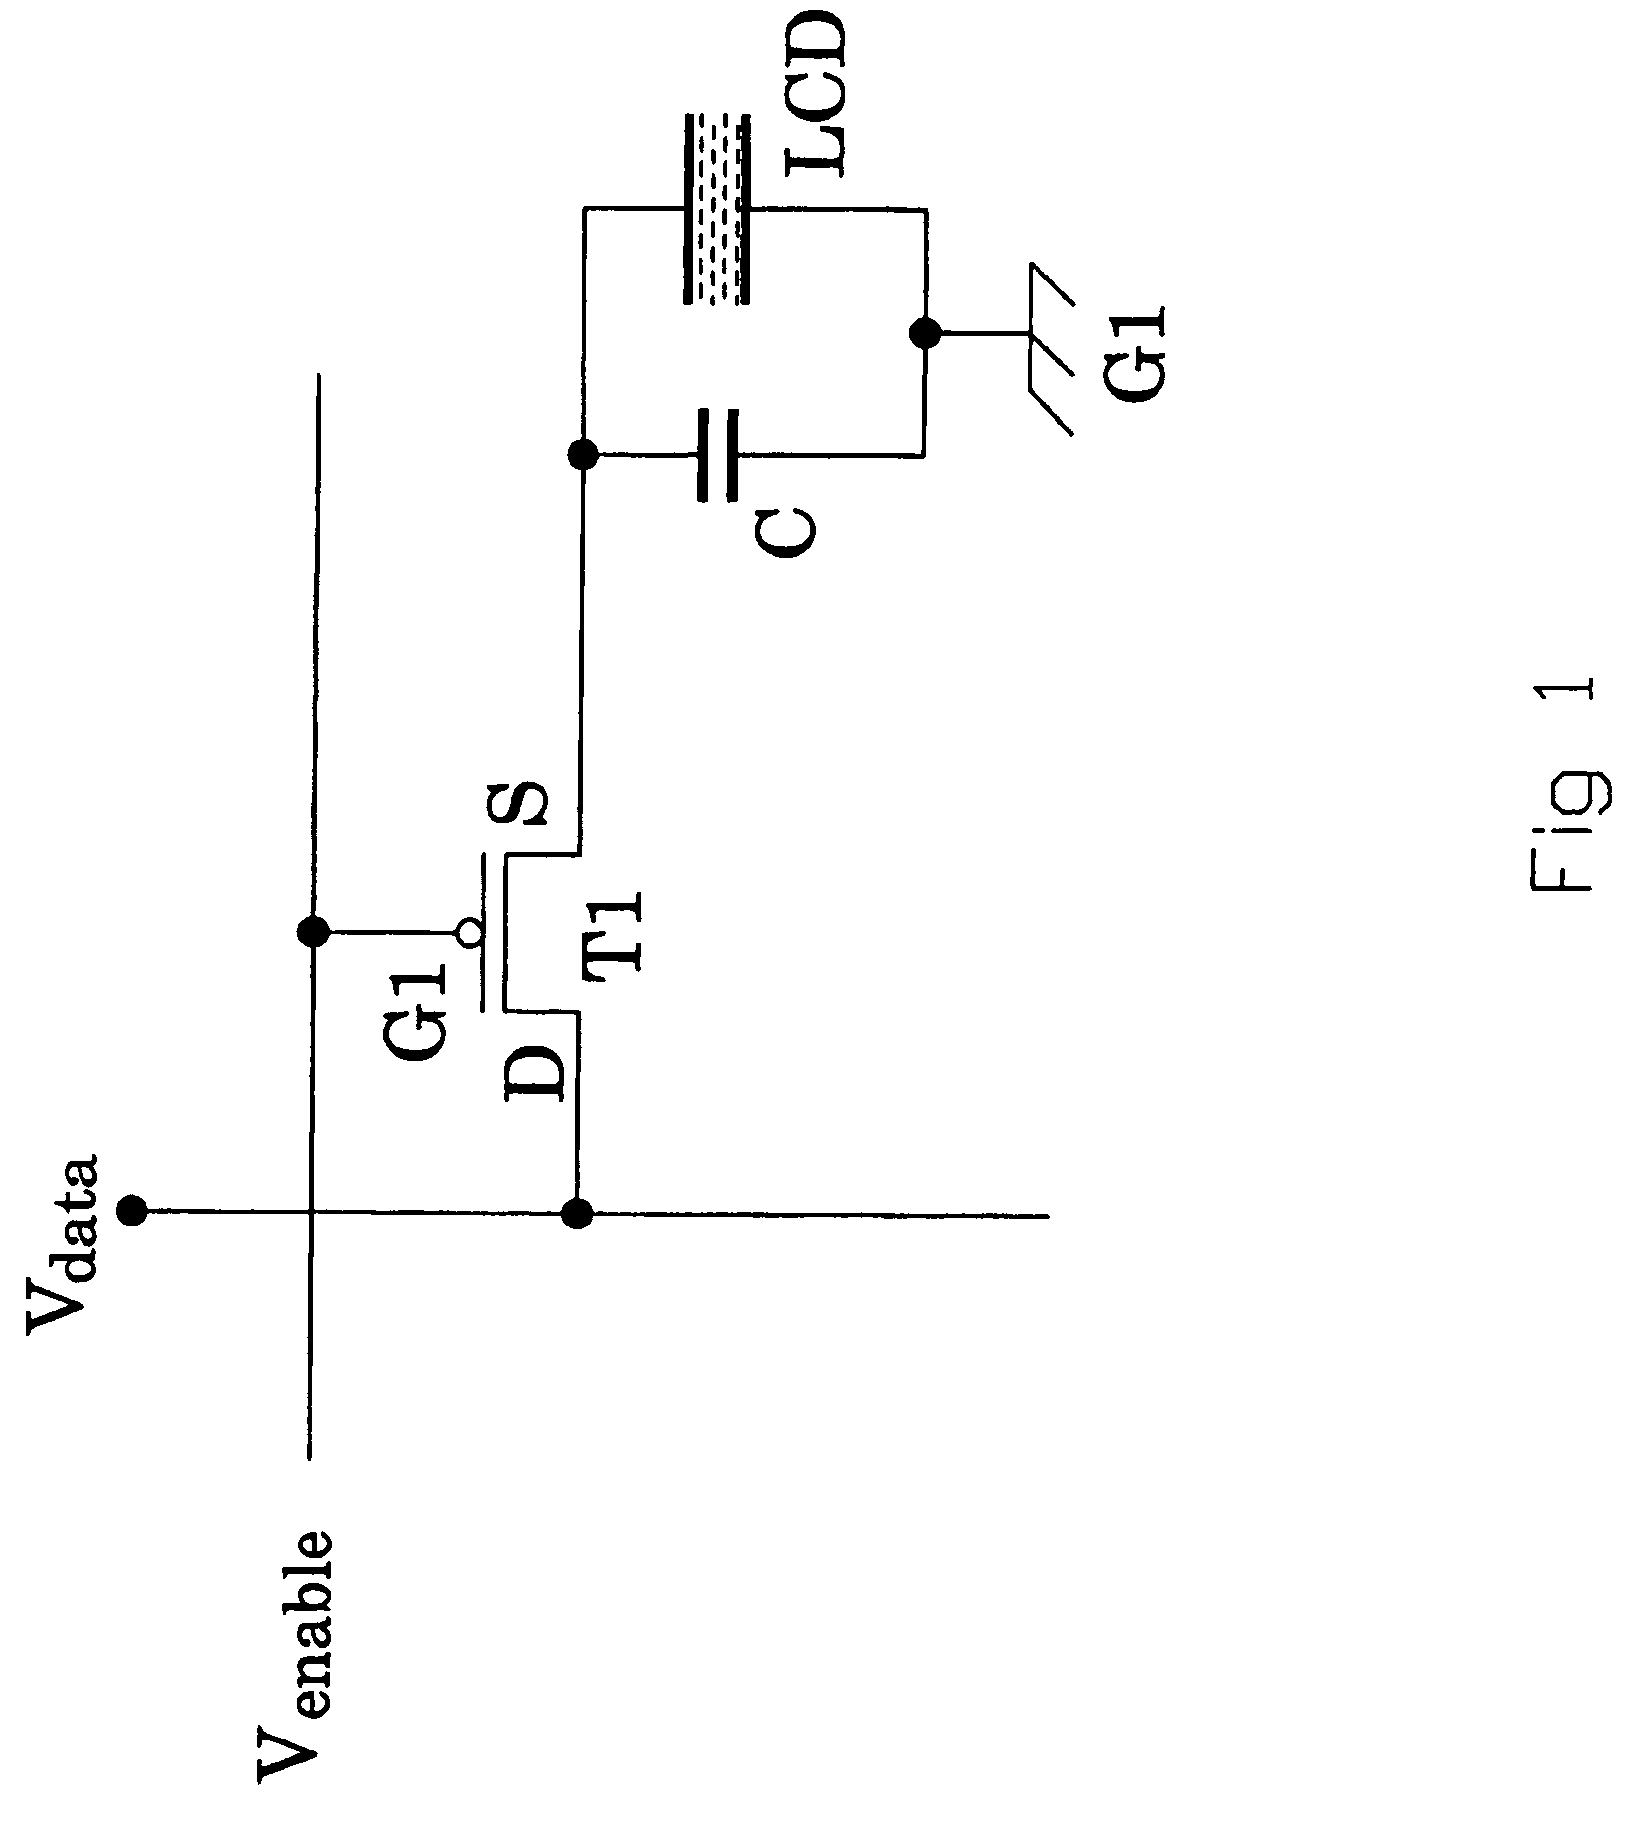 Low power circuits for active matrix emissive displays and methods of operating the same